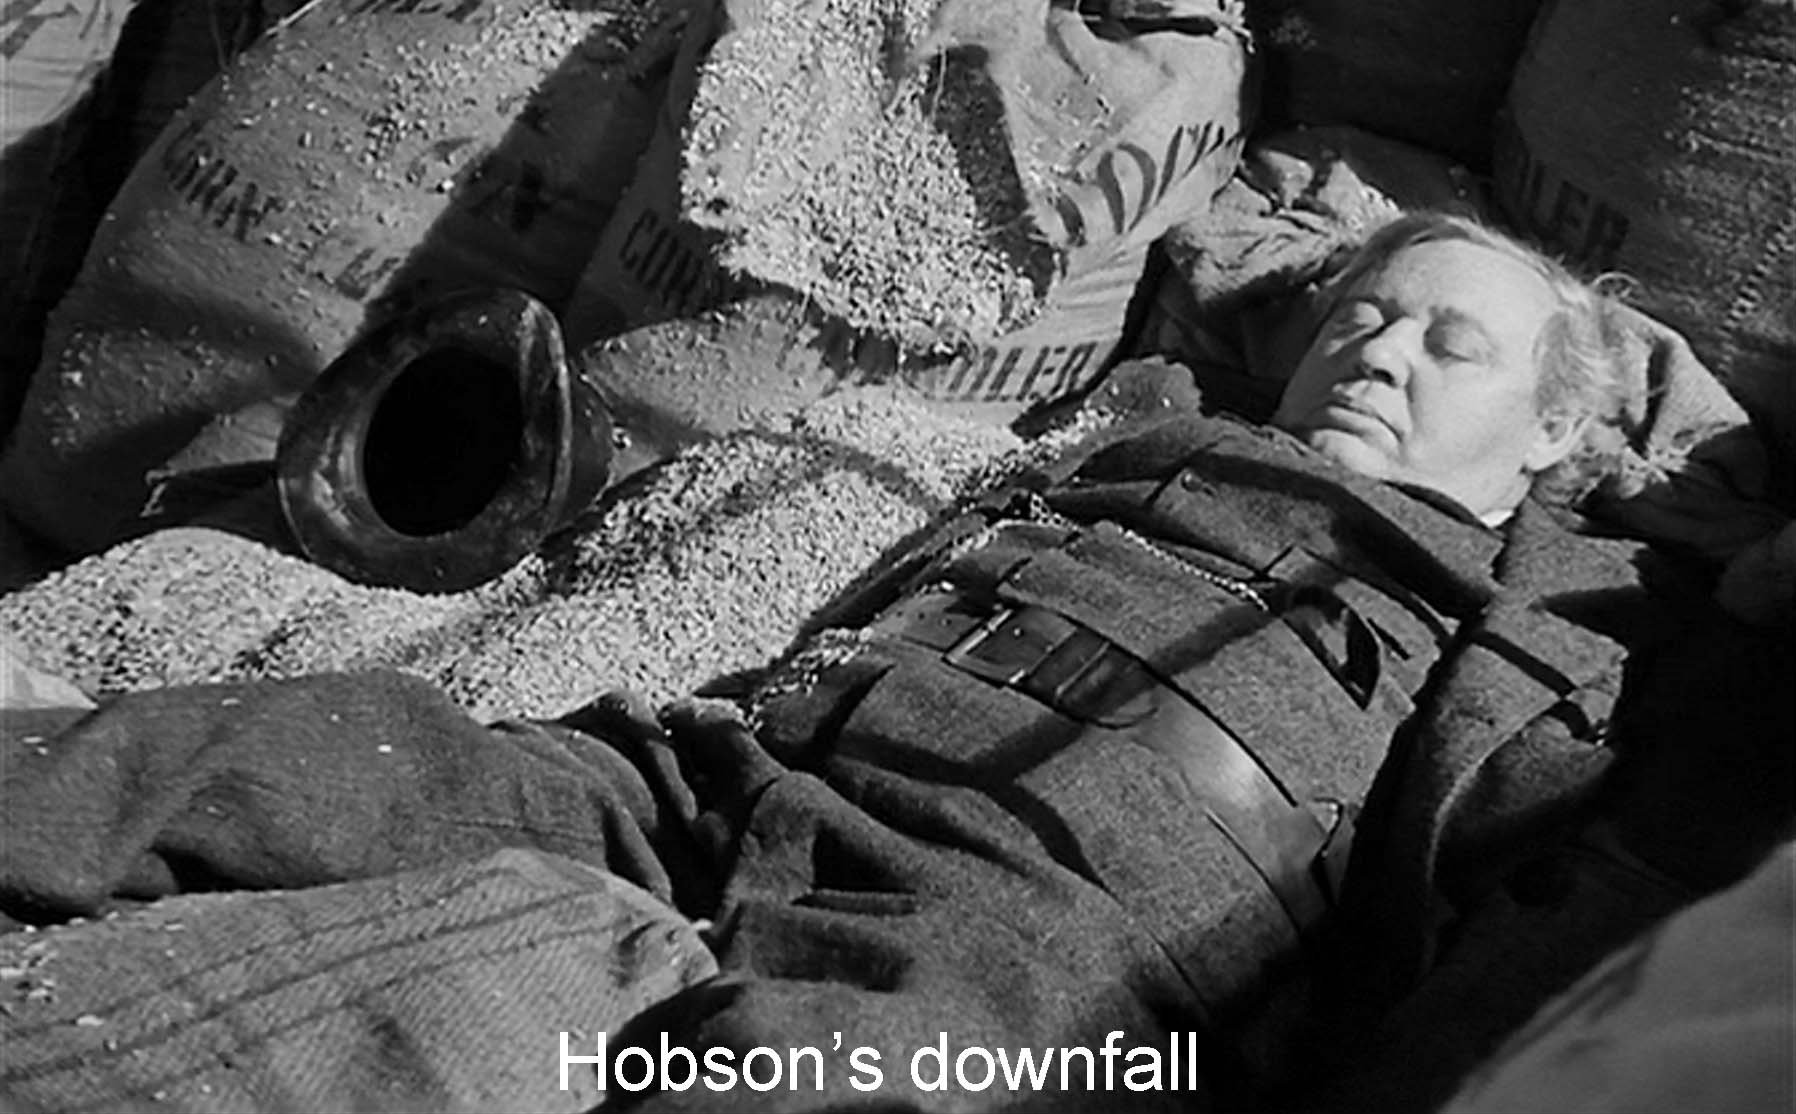  Hobson's downfall